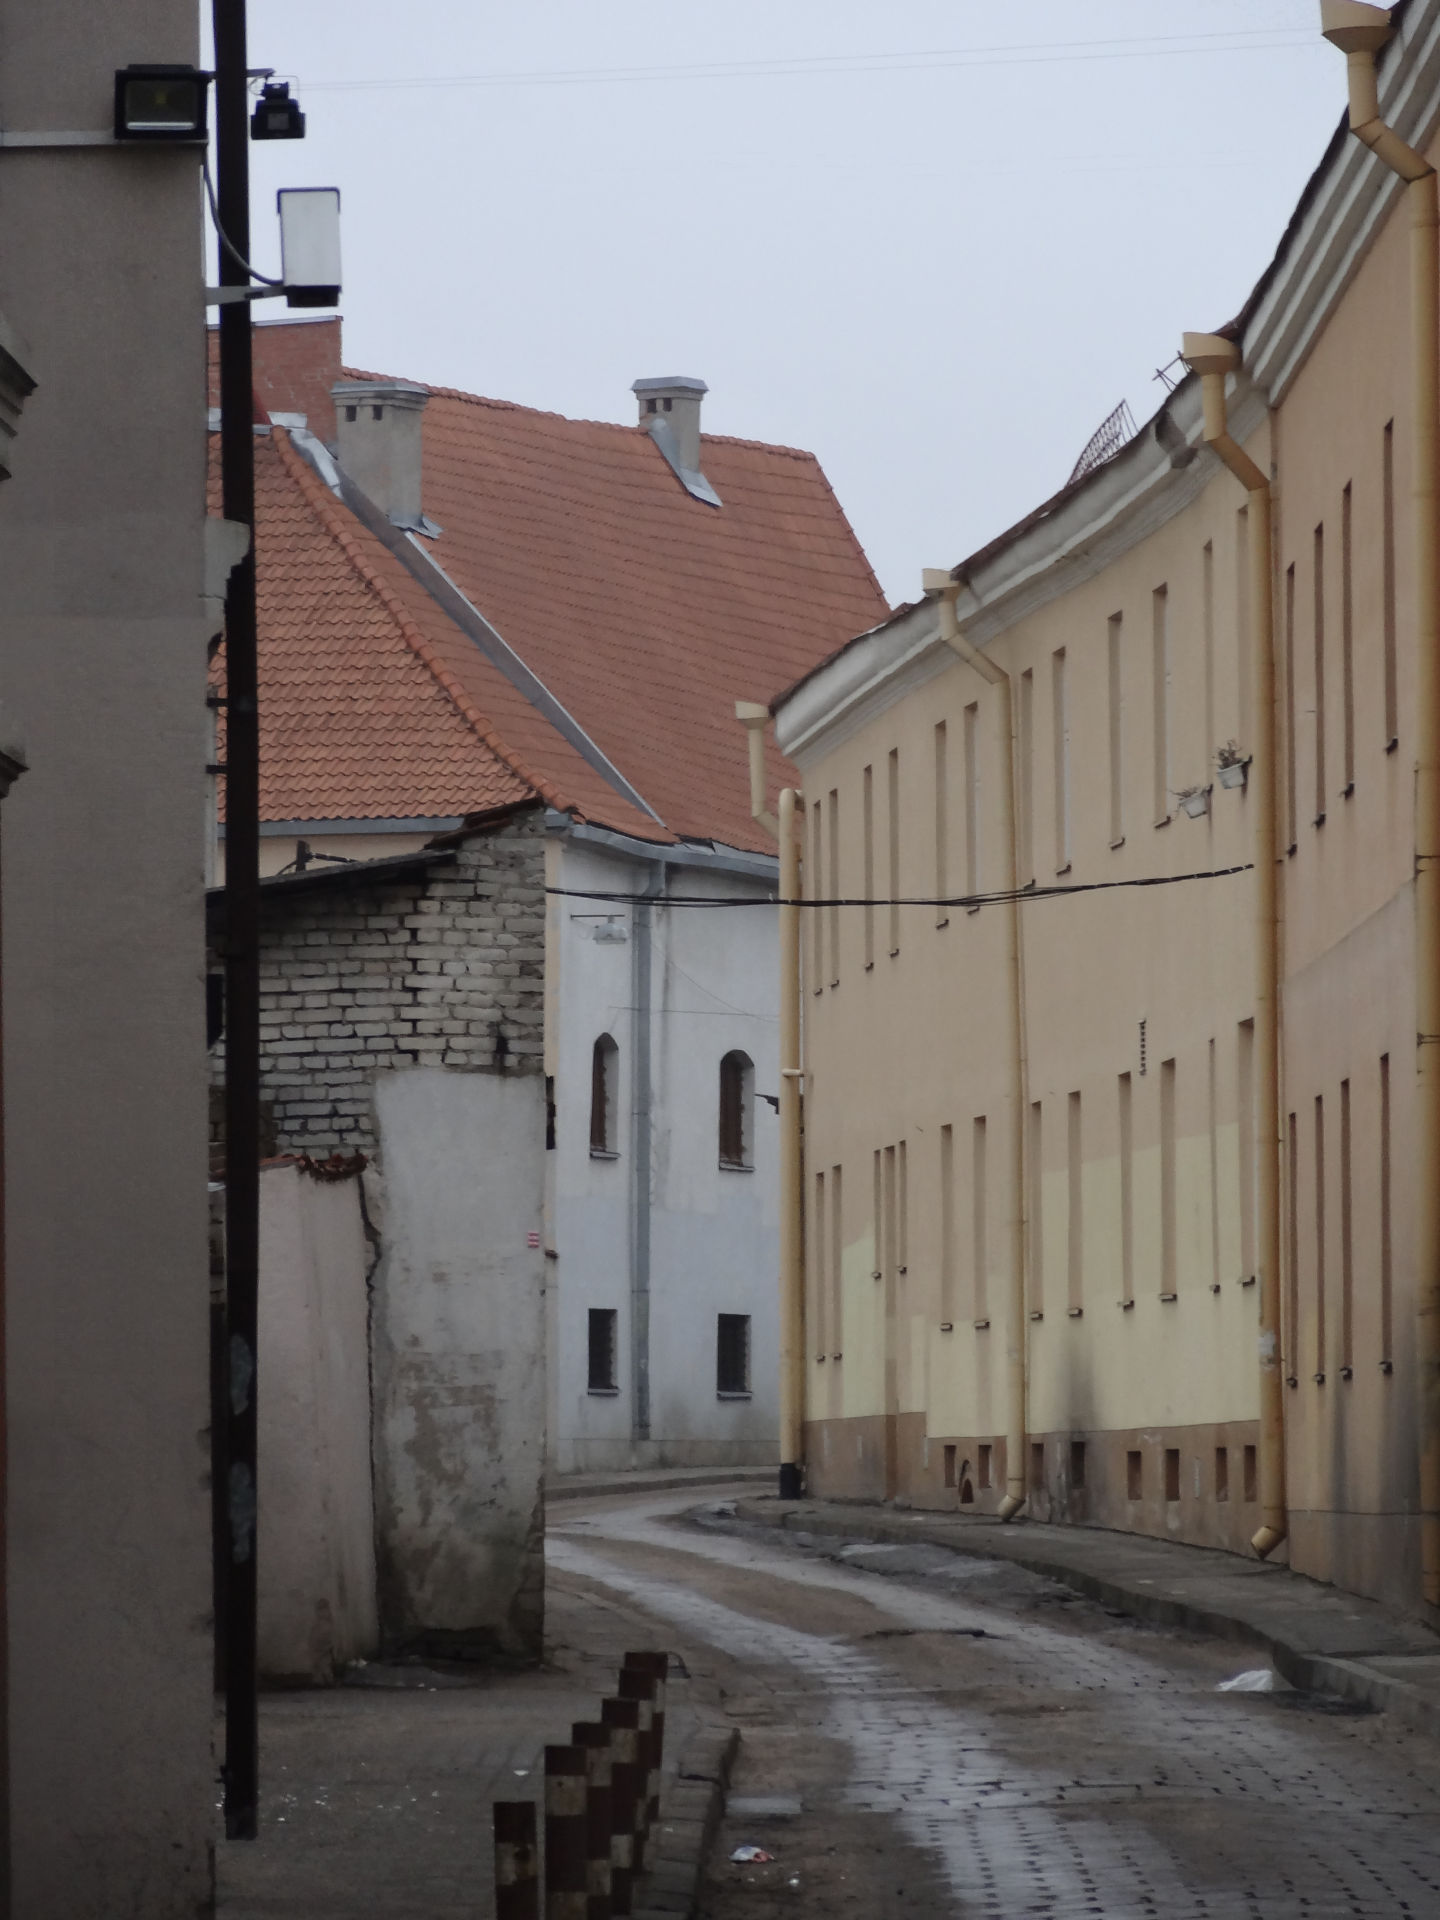 Backstreet at the old town